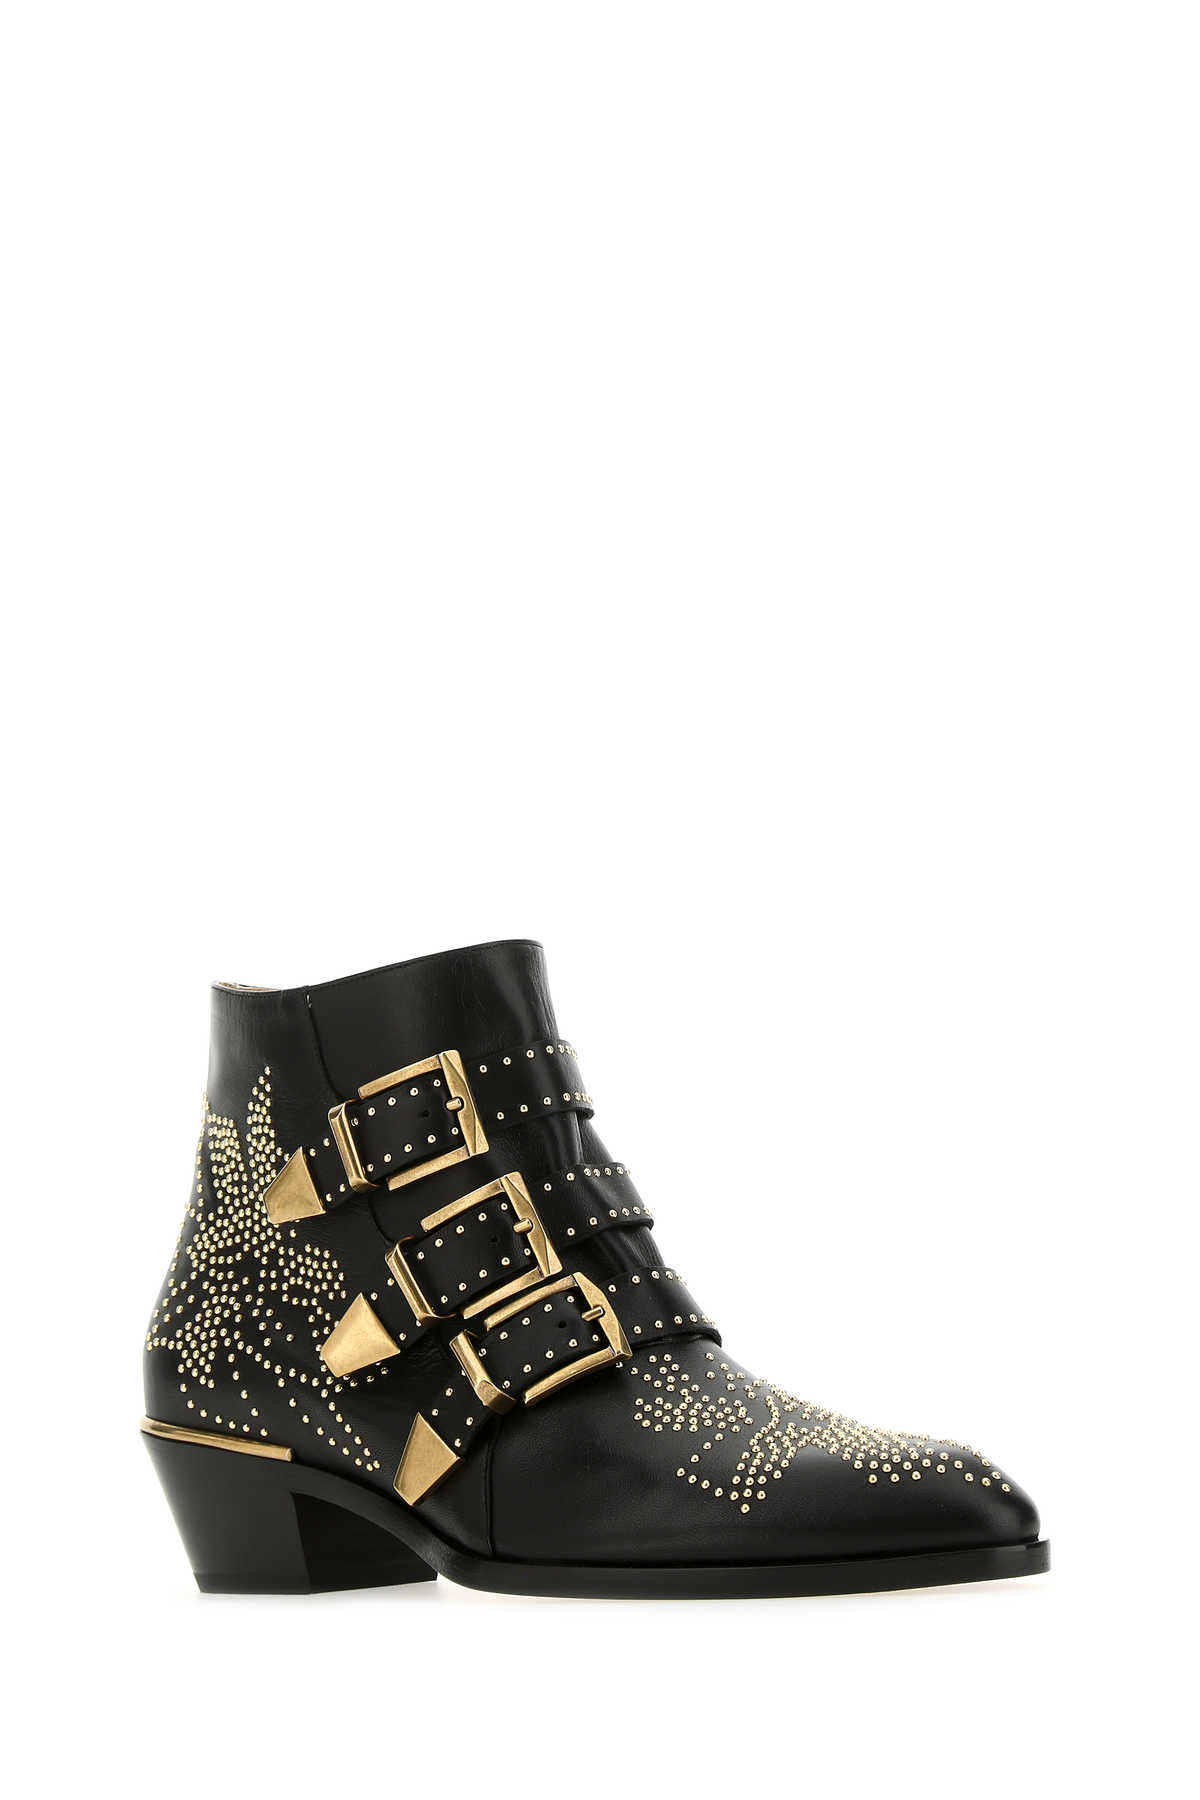 Shop Chloé Embellished Nappa Leather Susanna Ankle Boots In 0zy